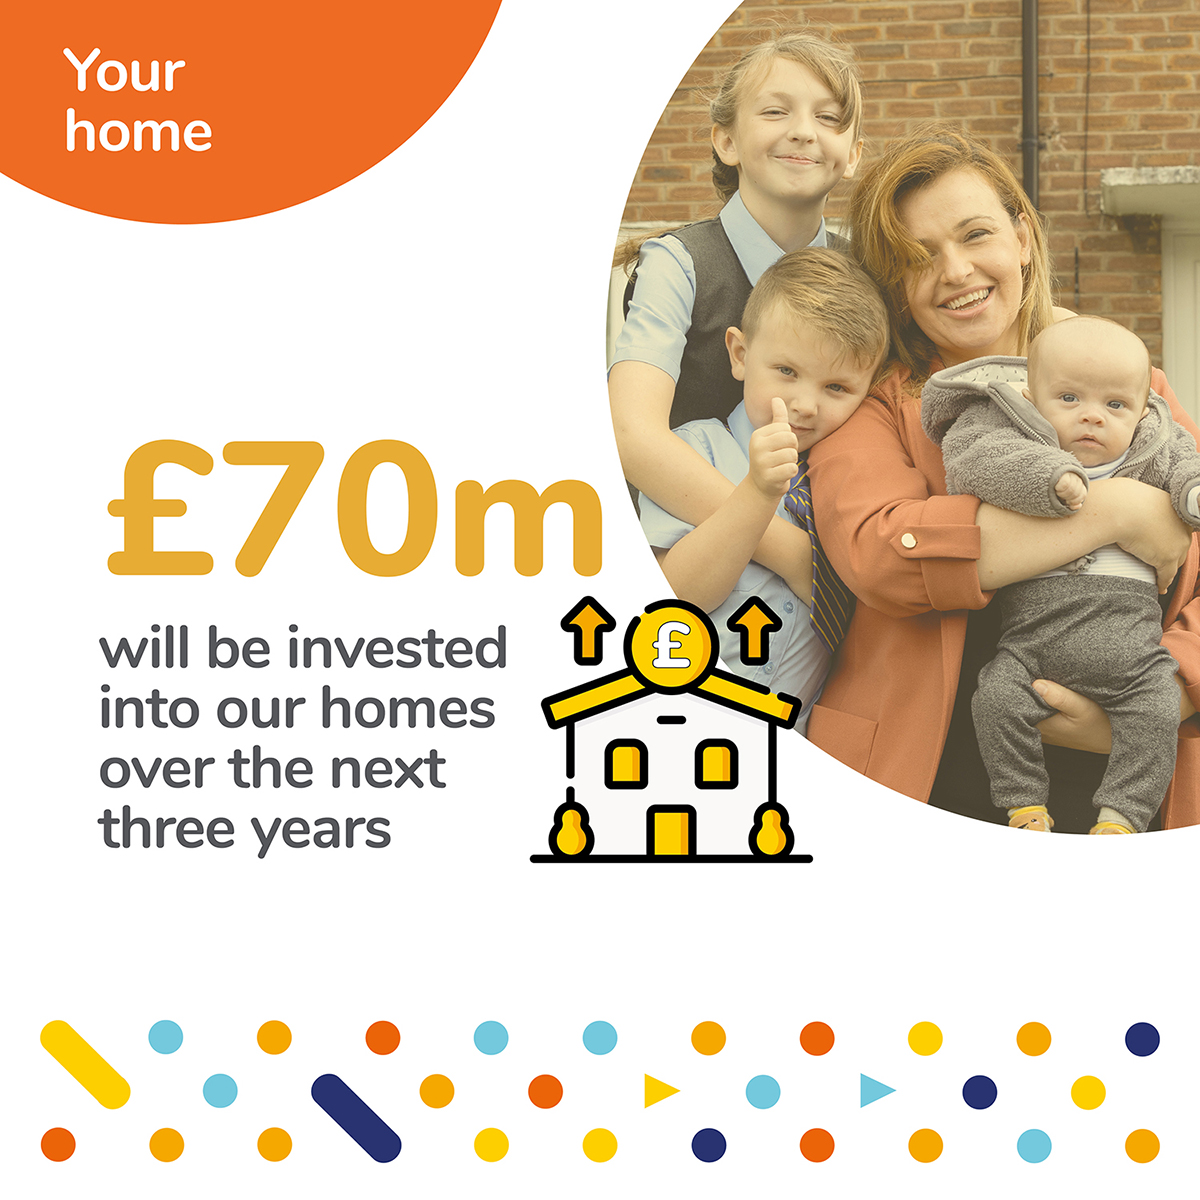 Over the next three years £70m will be invested into our homes. Have you watched our latest #Interview with our Customer Panel and our CEO, Léann Hearne yet? View the full video here 👉 bit.ly/3eKxFhL View our 2021/2022 #annualreport here 👉 bit.ly/3fr2CY7